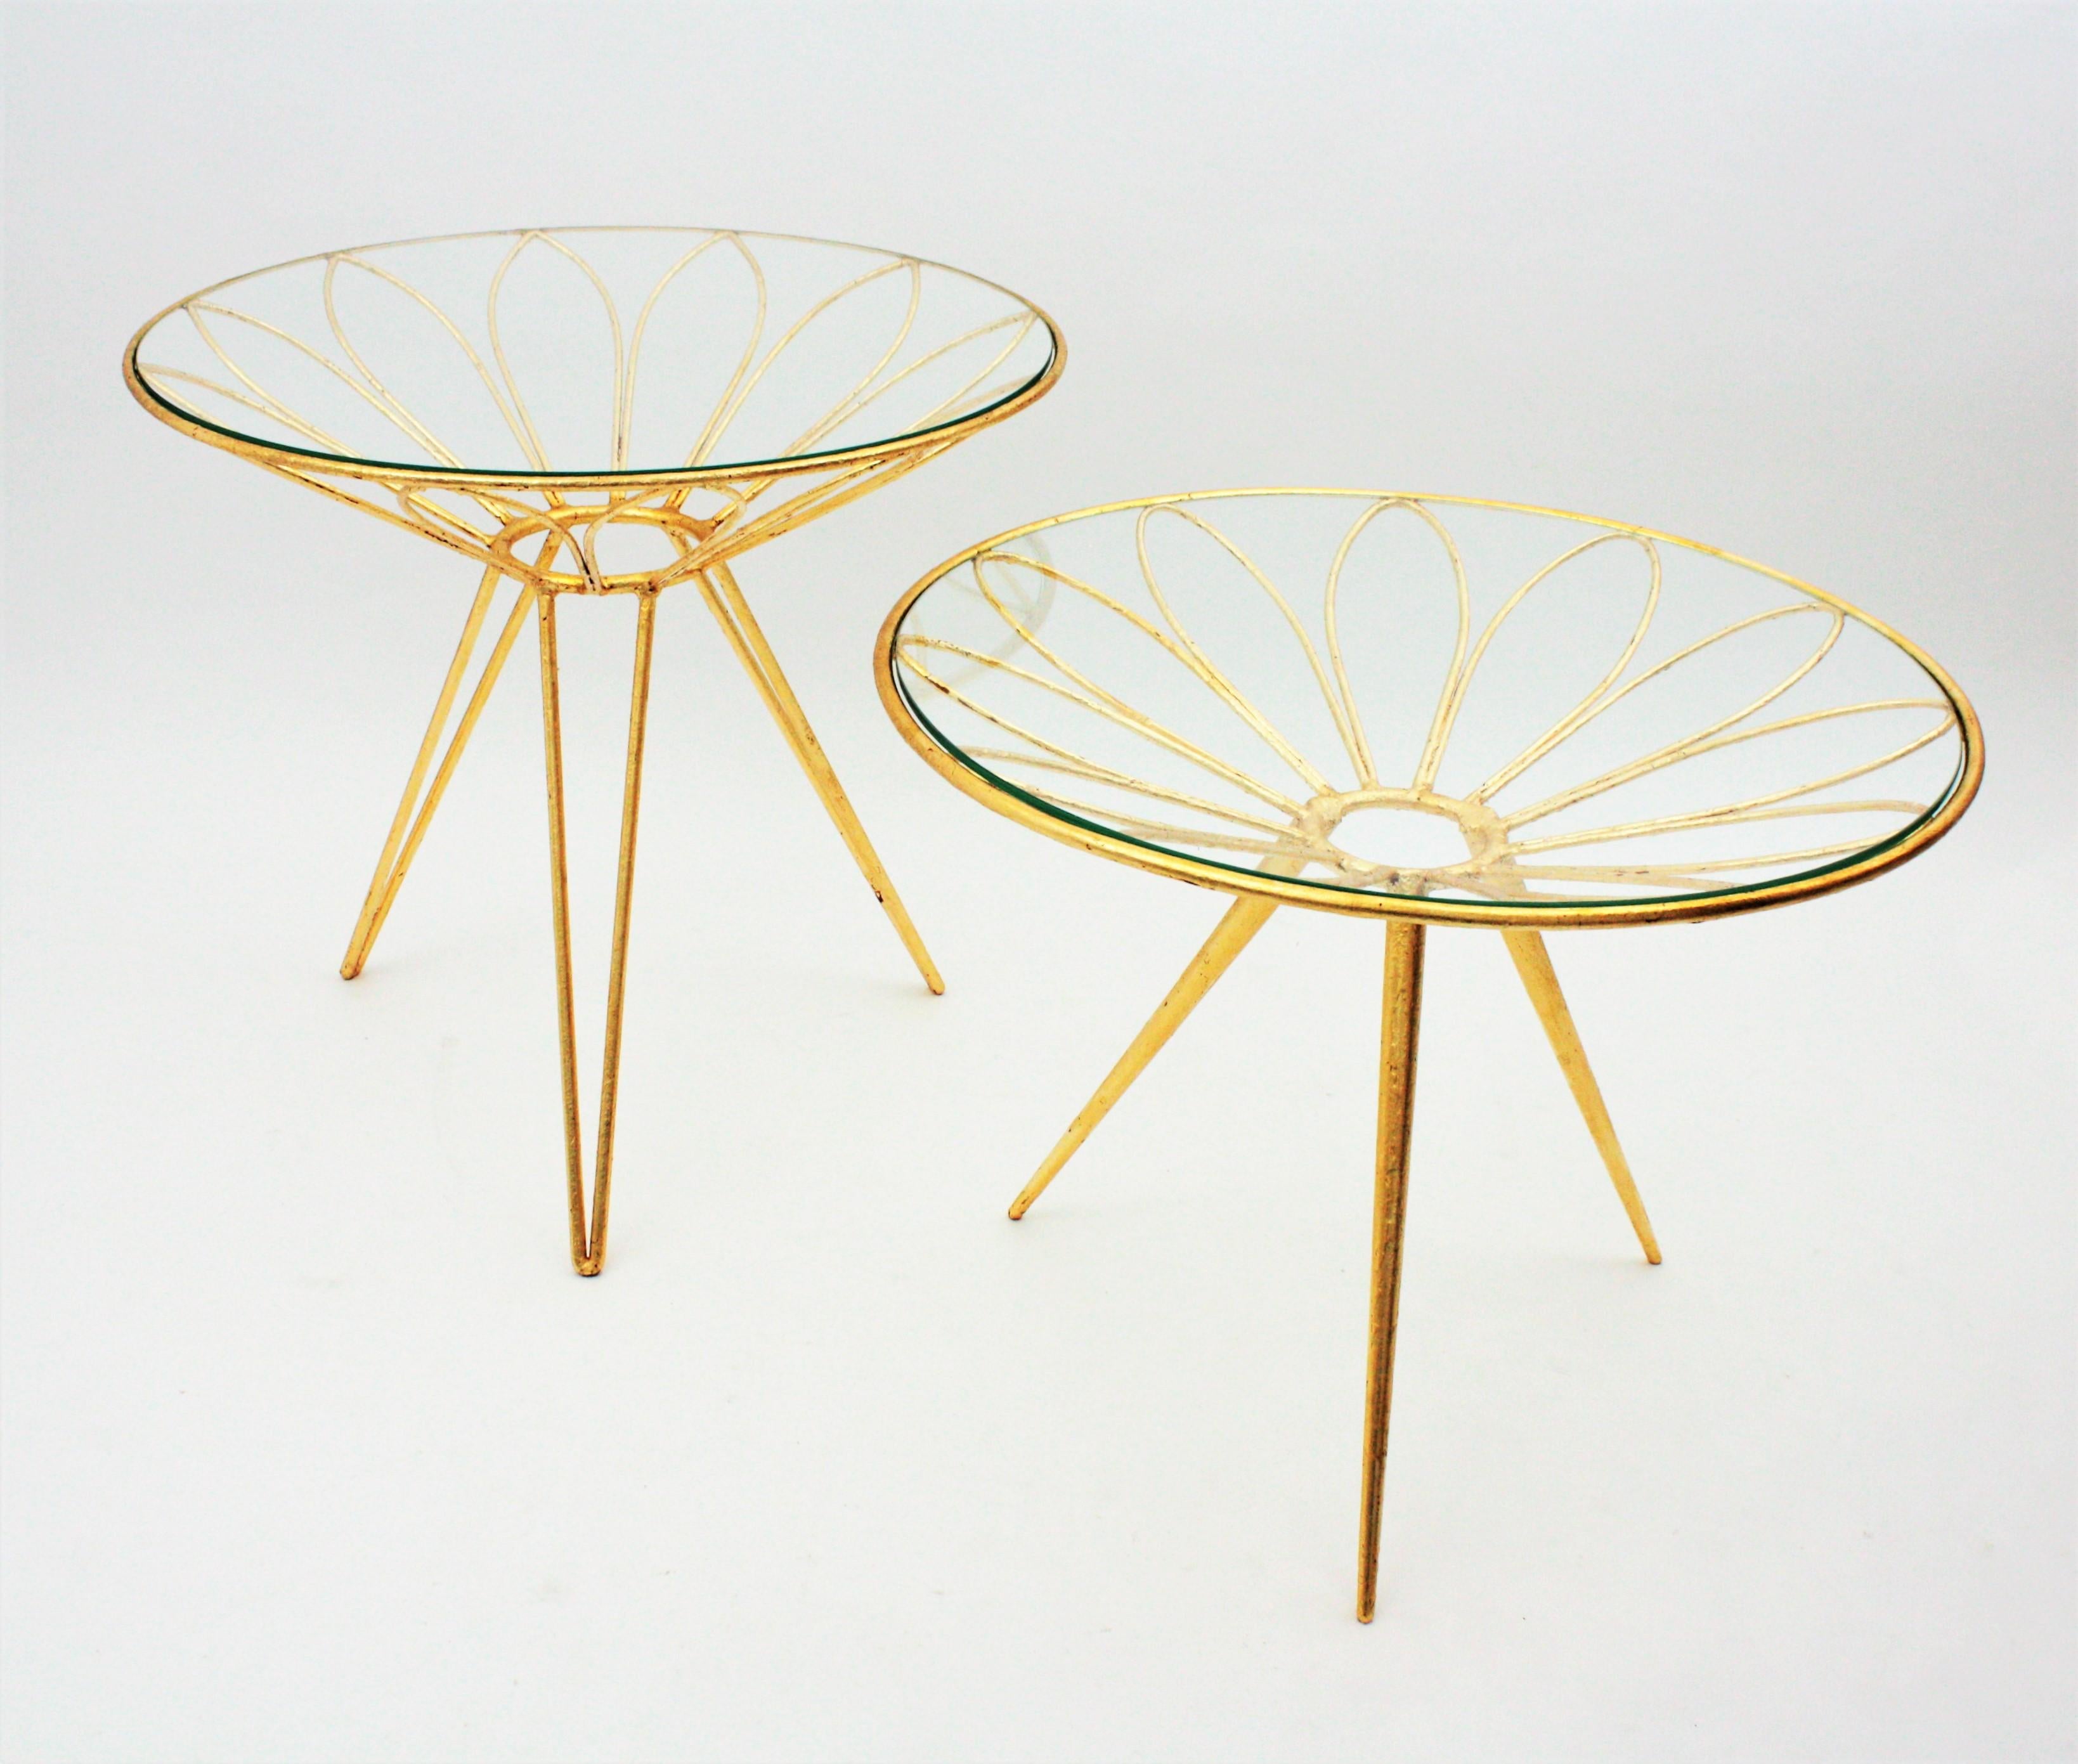 French Side Tables in Gilt Iron Daisy Flower Design, 1950s In Good Condition For Sale In Barcelona, ES